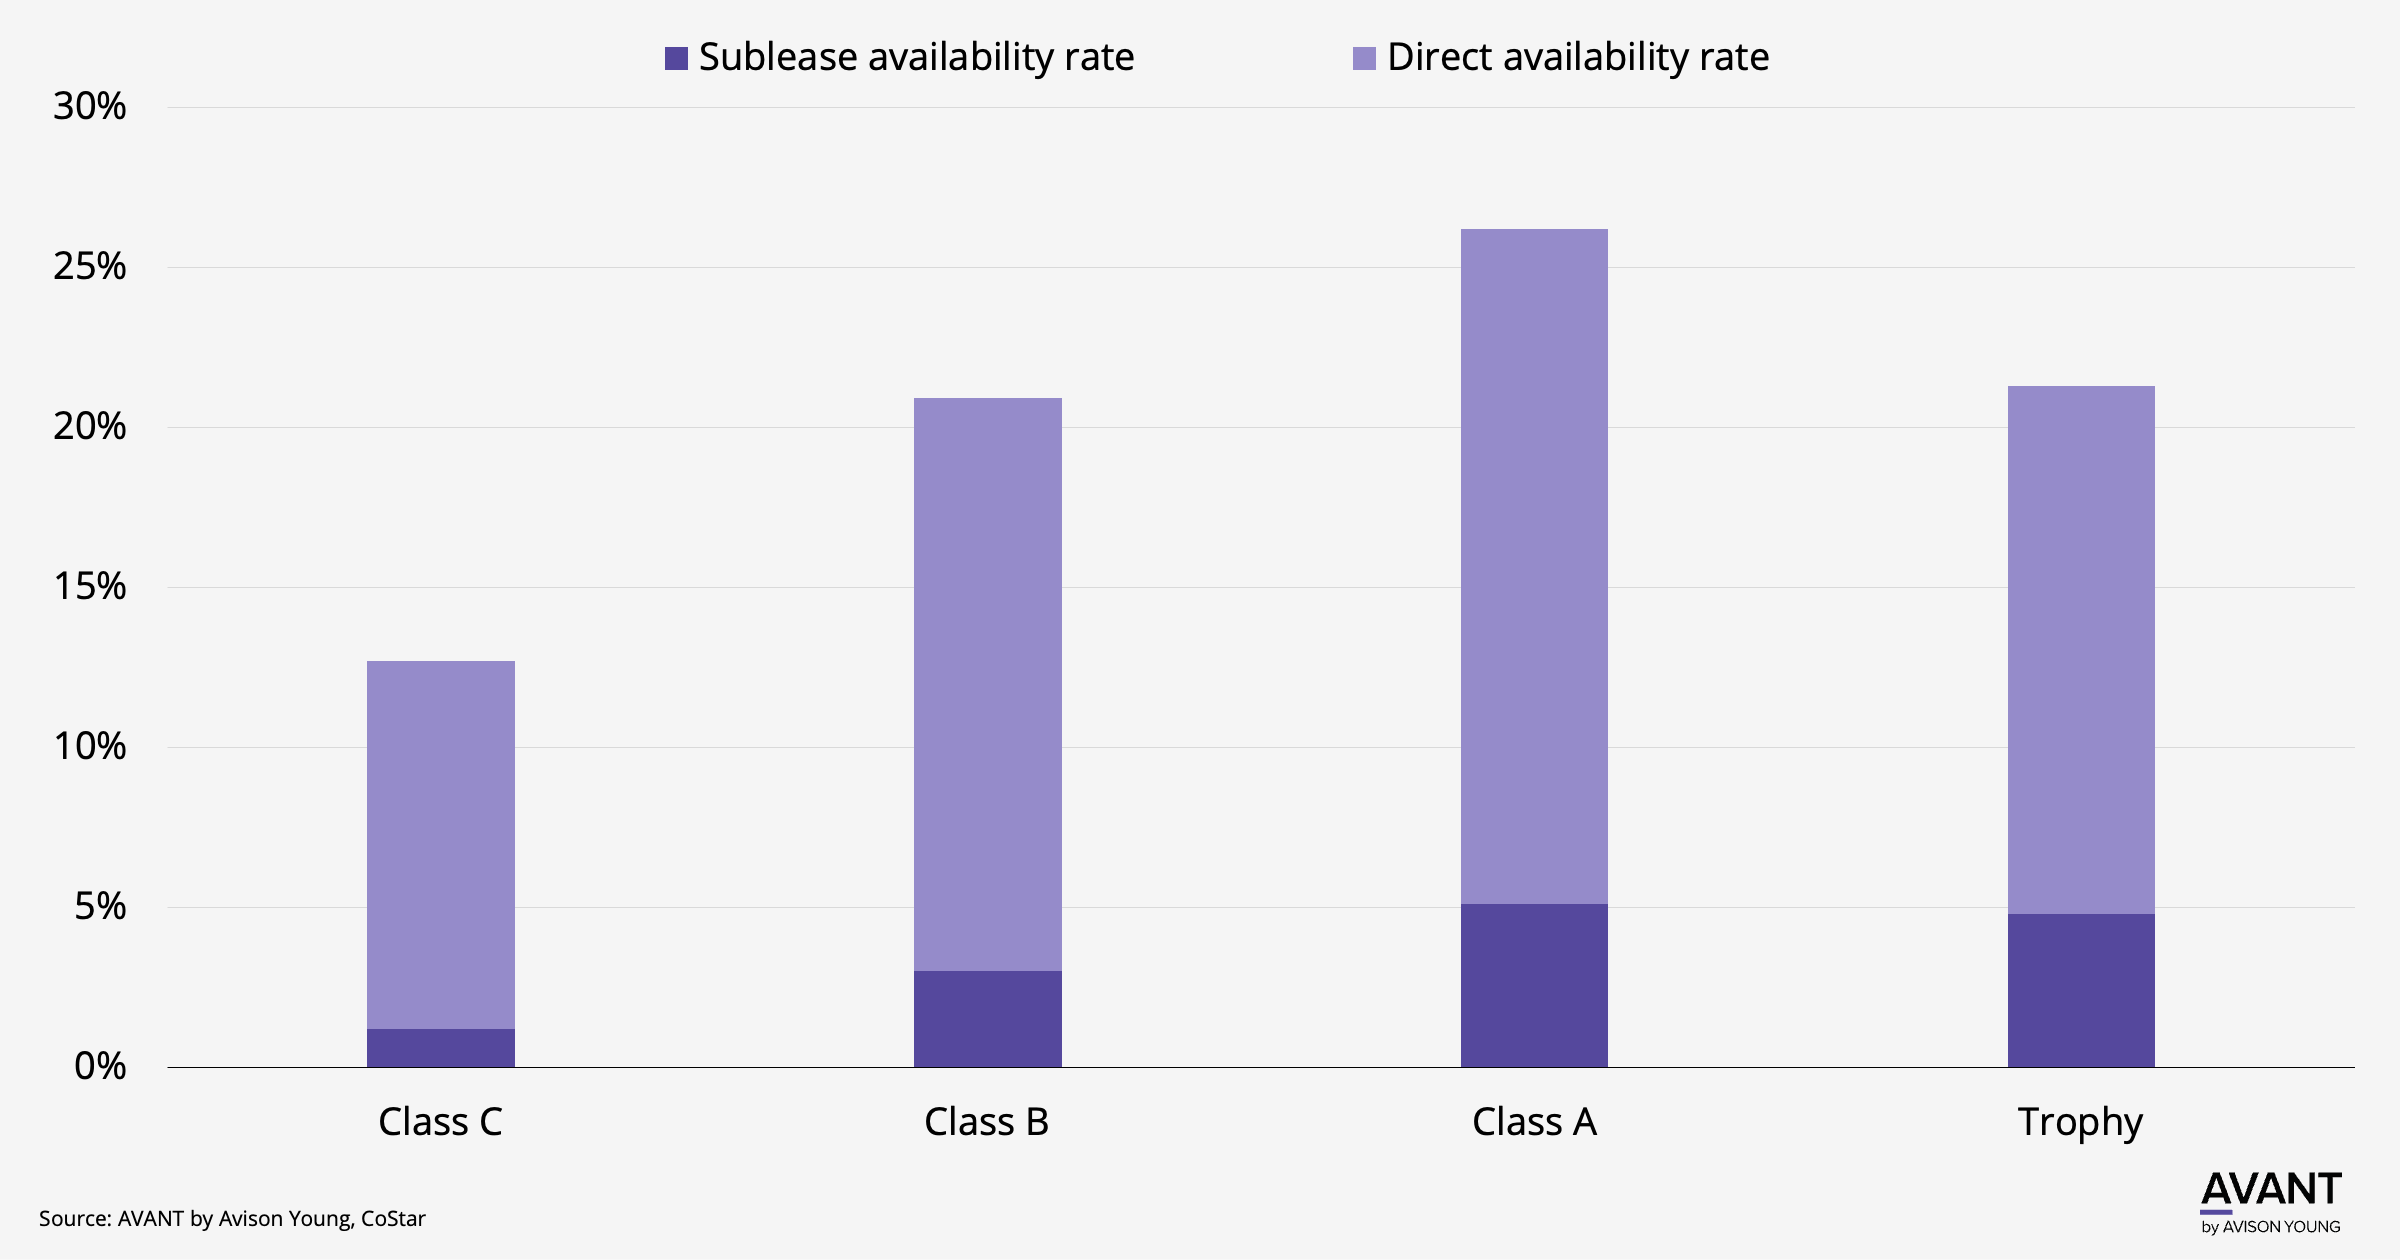 Chart of commercial real estate asset classes comparing sublease and direct availability rates.